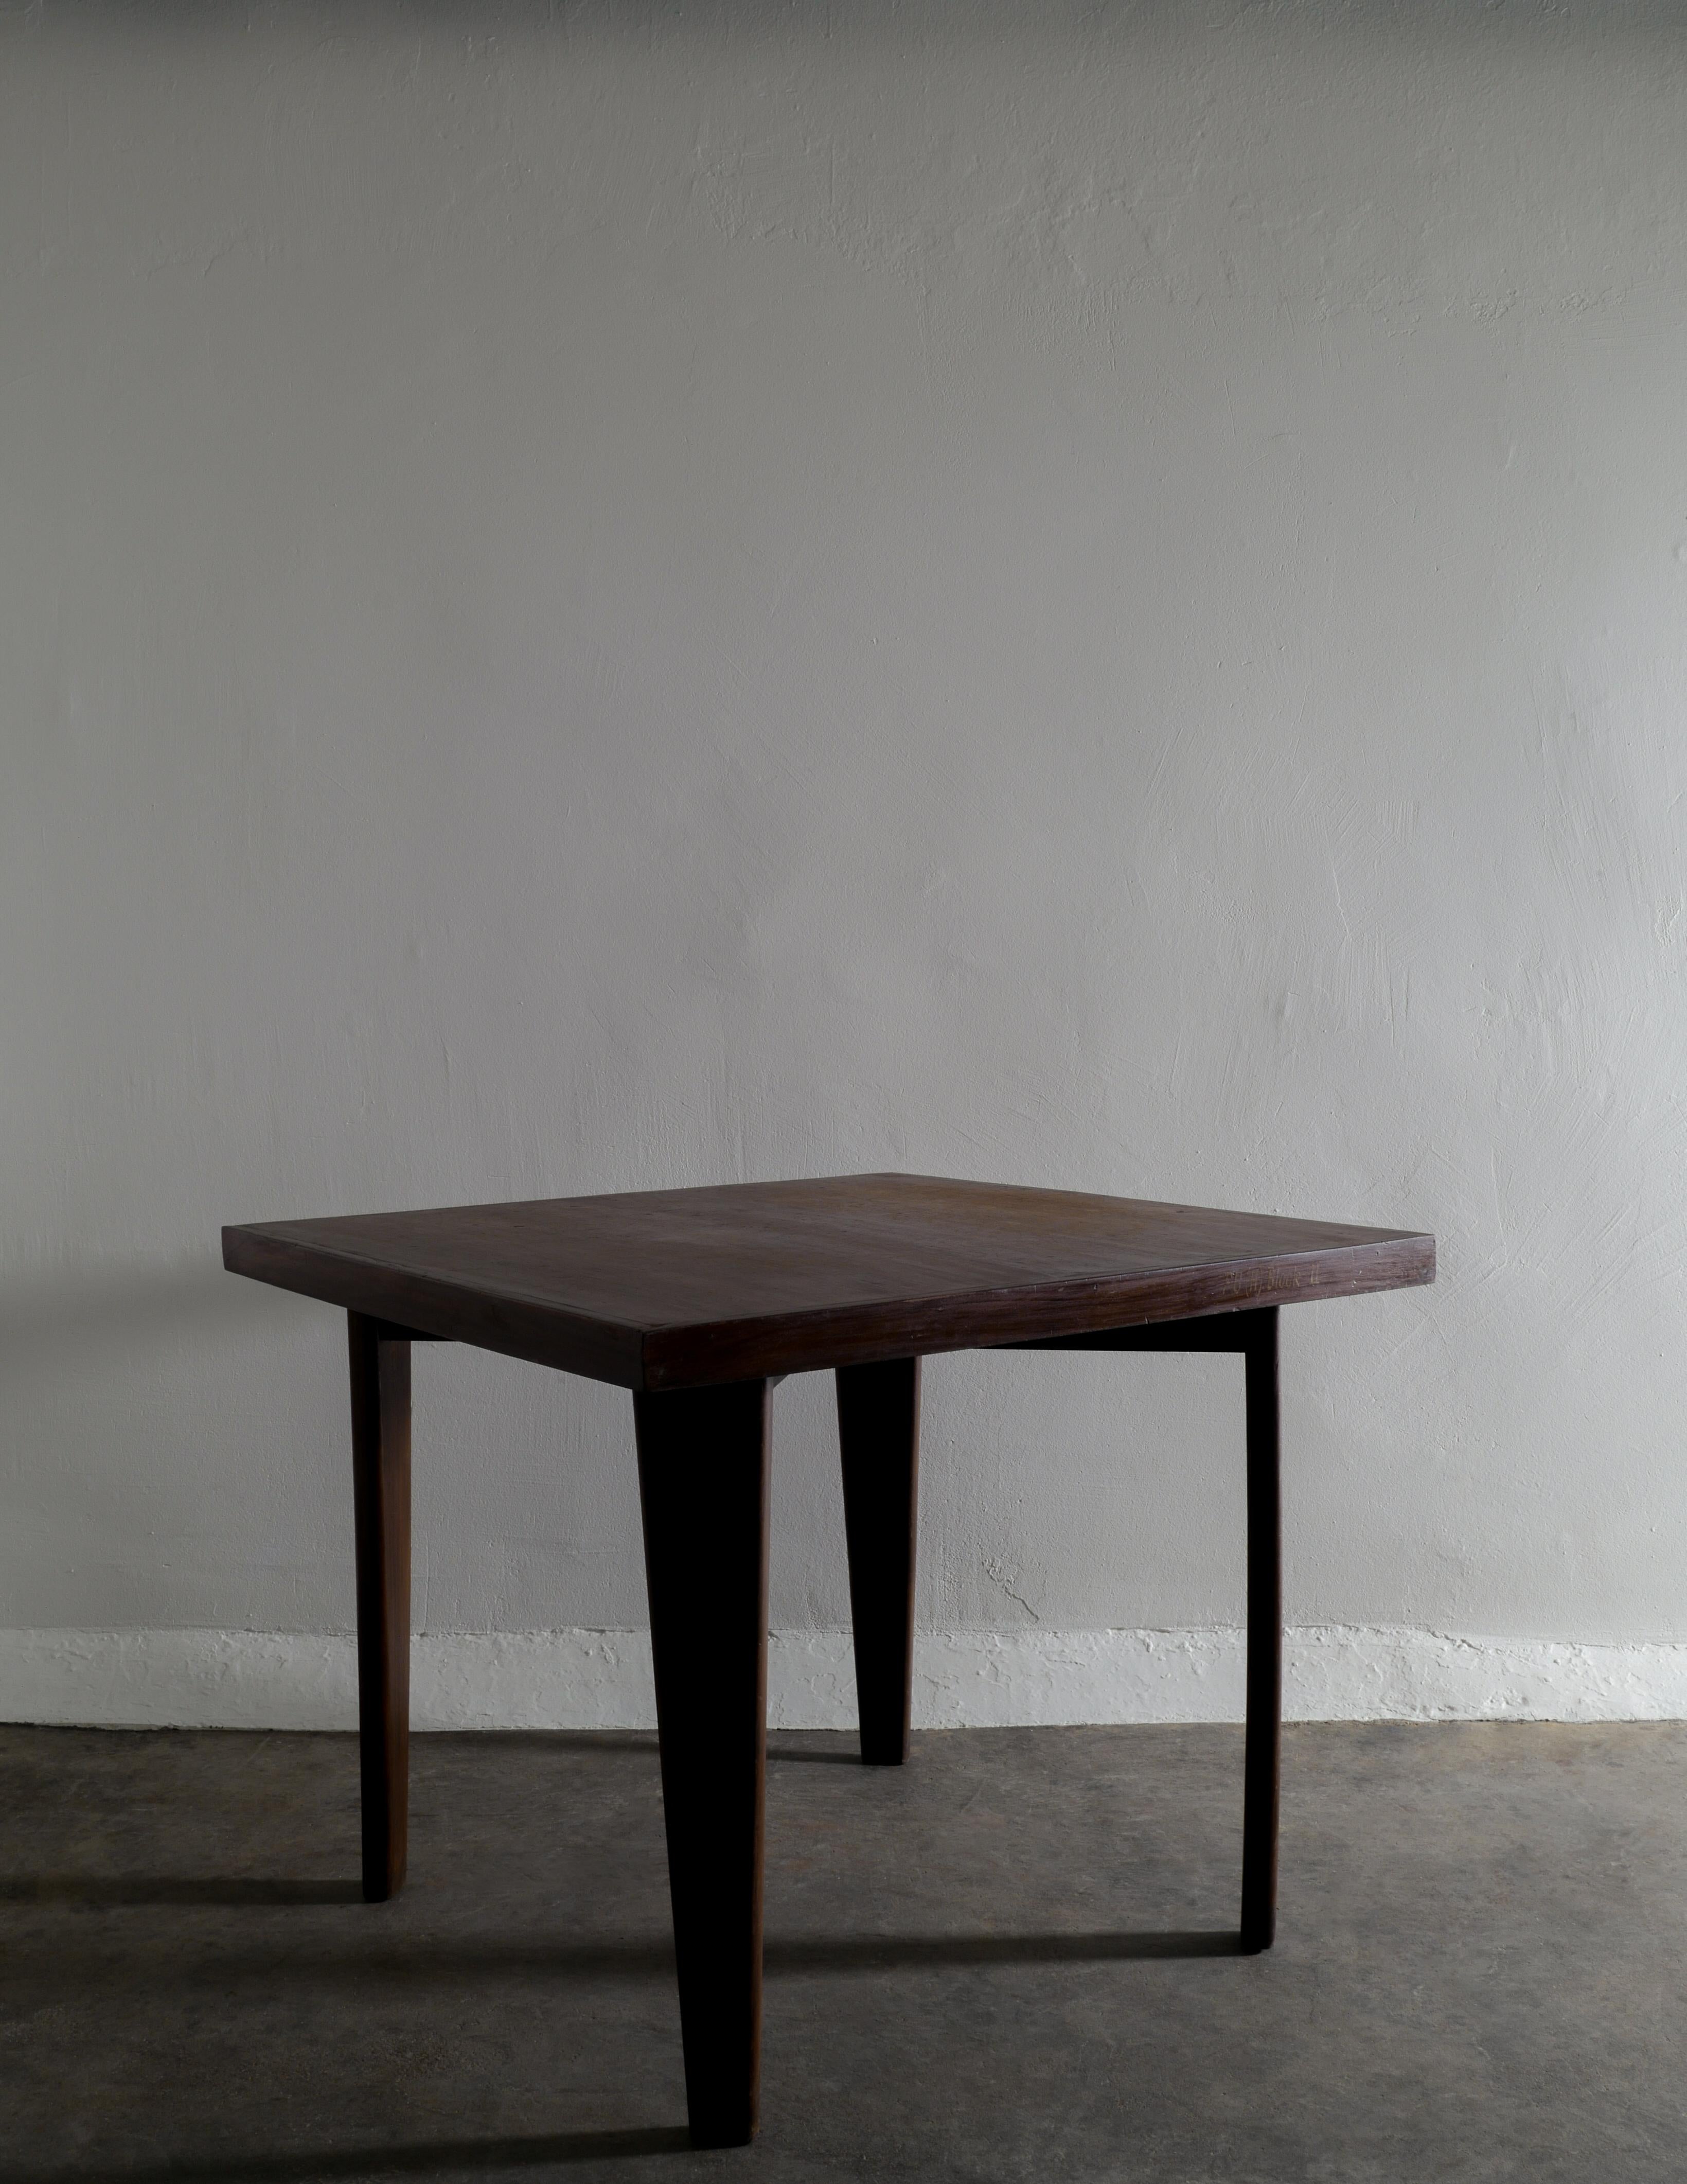 Very rare café / smaller dining table in a square style designed by Pierre Jeanneret in solid dark brown stained teak for Chandigarh, India in the 1950s. In good vintage condition with beautiful and honest patina from age and use. One of the sides